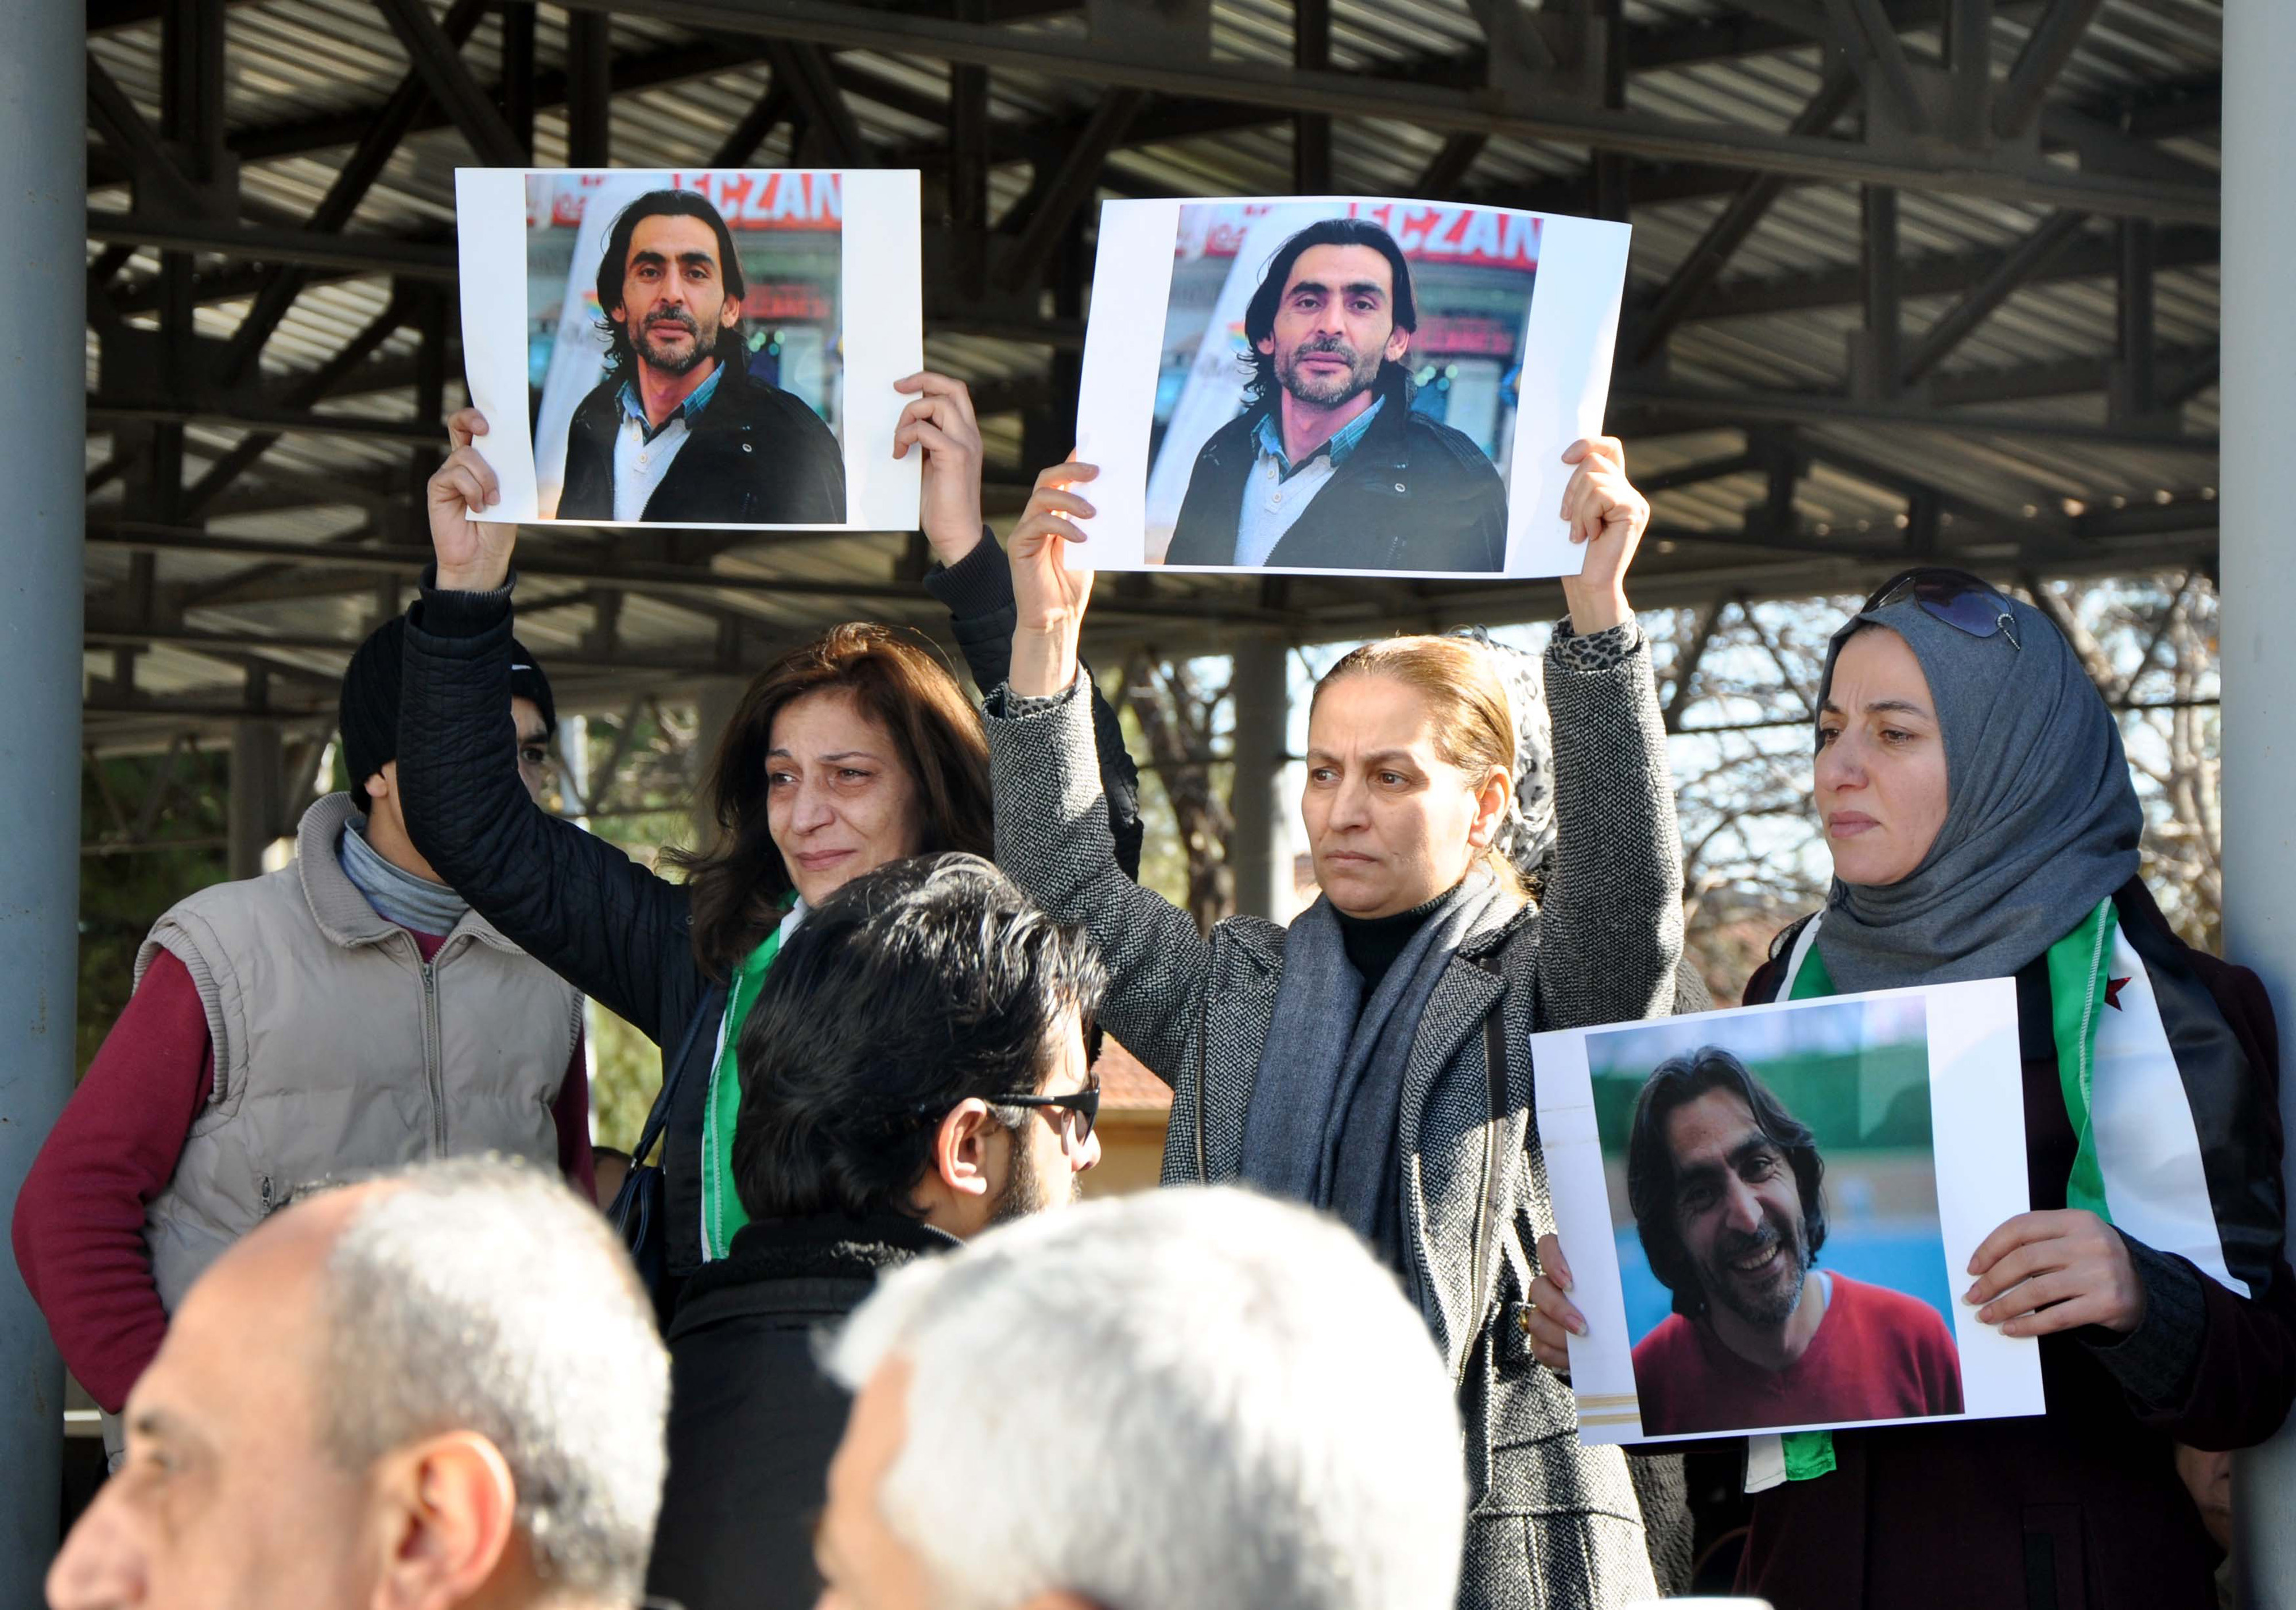 Women hold pictures of film maker Naji Jerf, who was killed on December 27, during his funeral in Gaziantep on Dec. 28, 2015. (AFP/Getty Images)